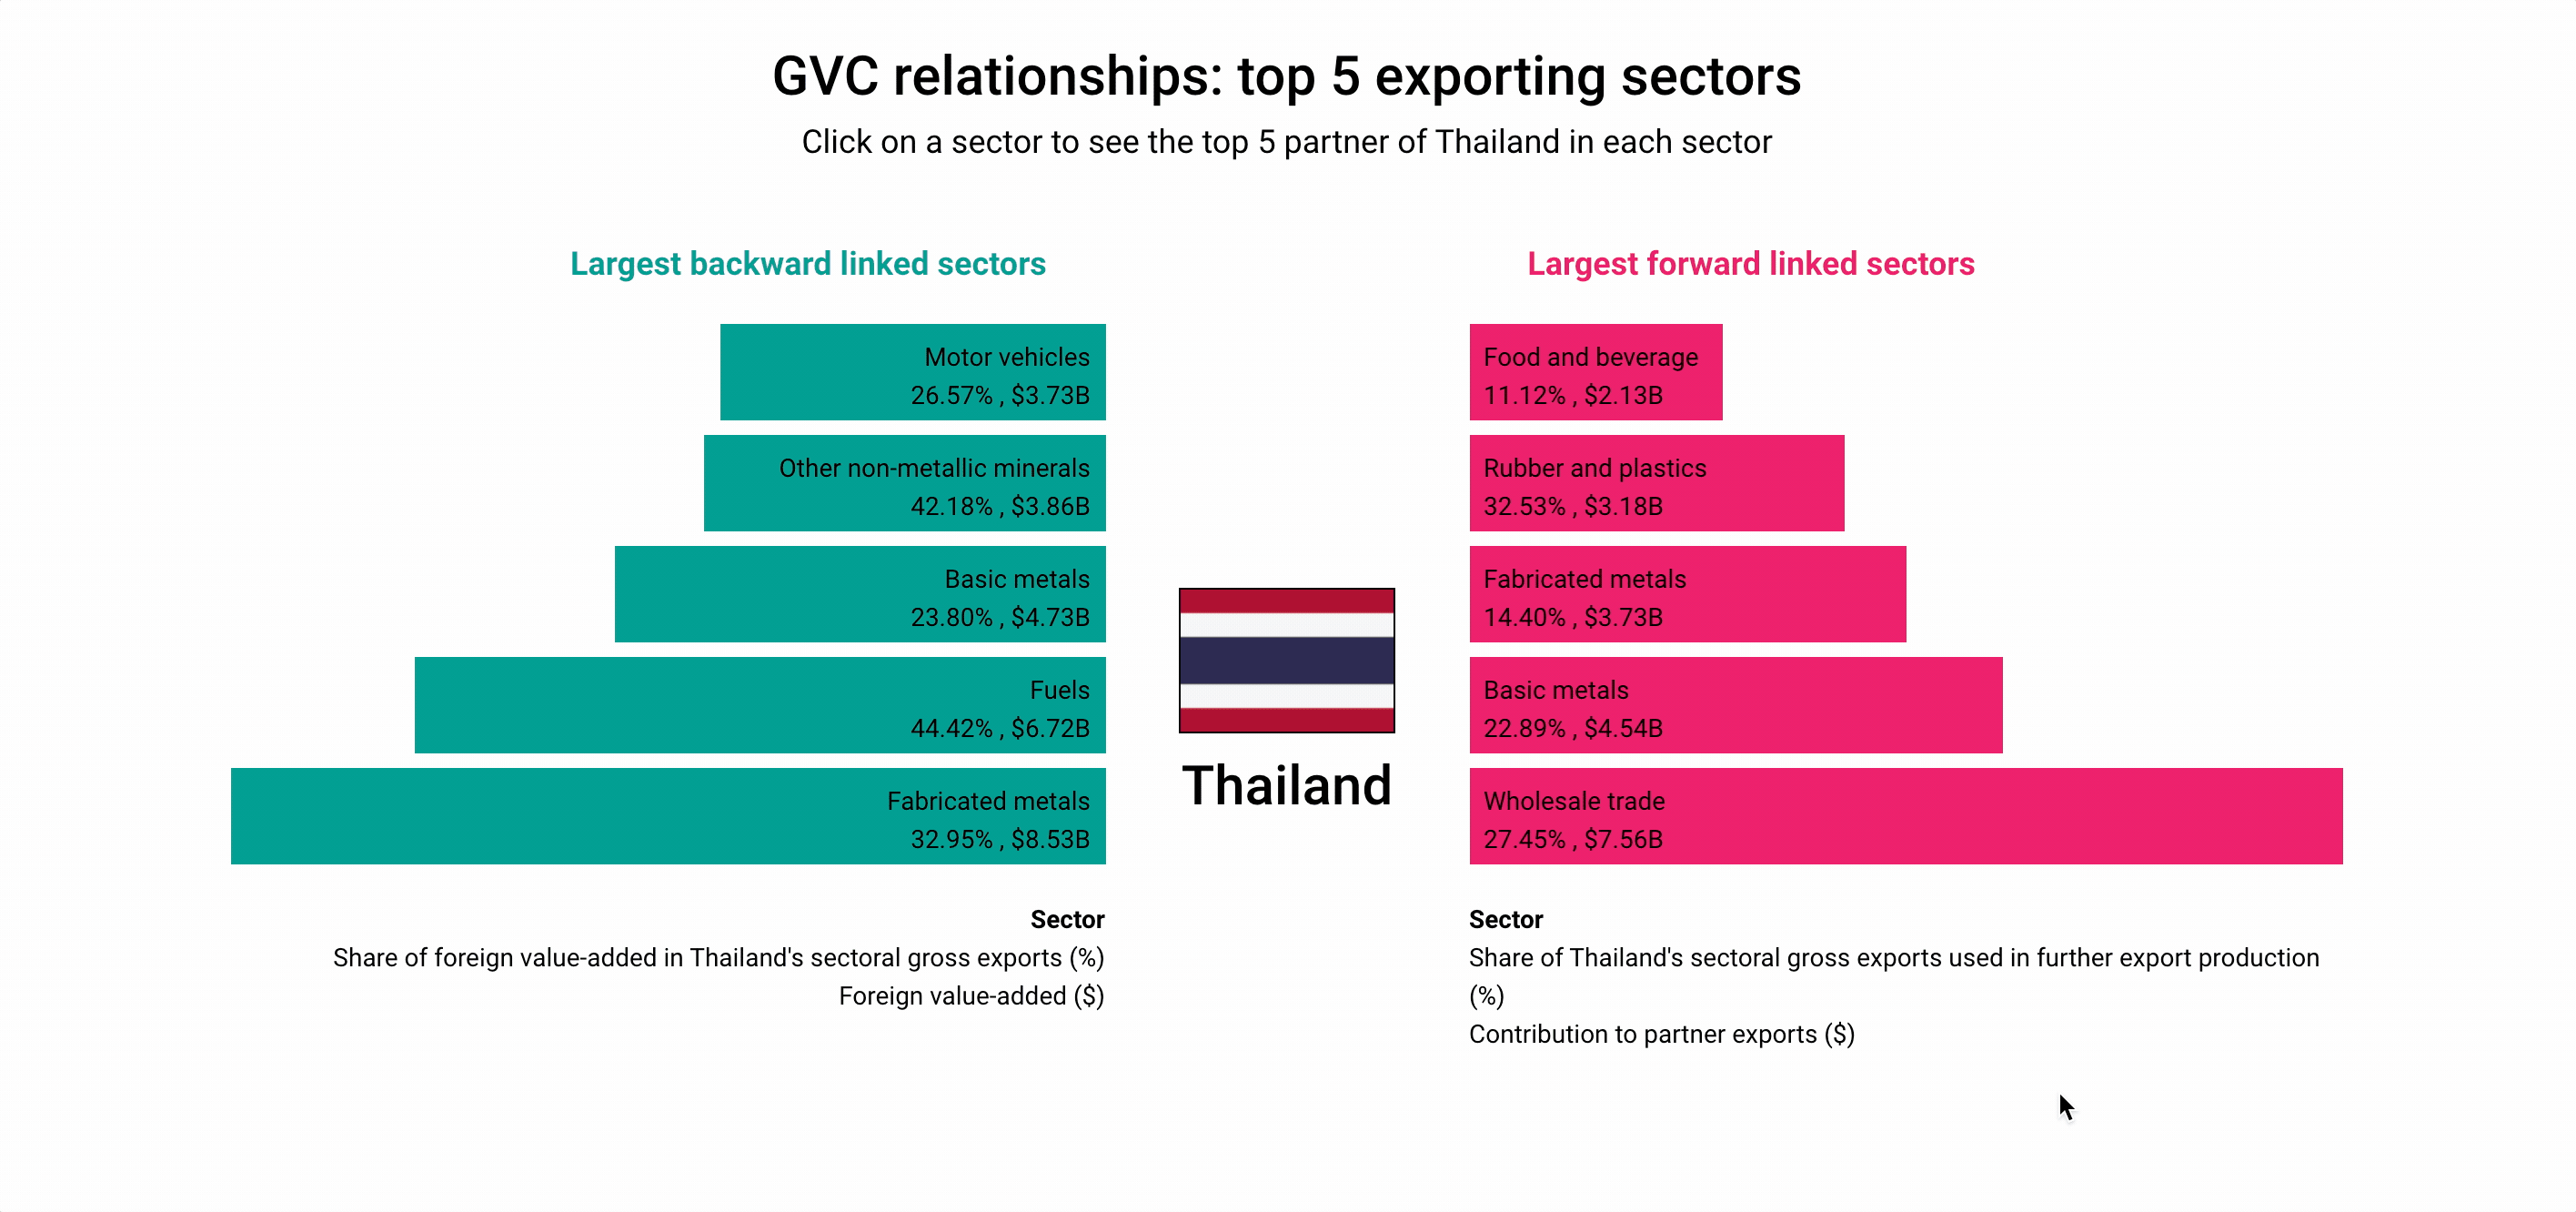 *Drilling down to see partners of Thailand in 'Wholesale trade' sector, forward linkages*